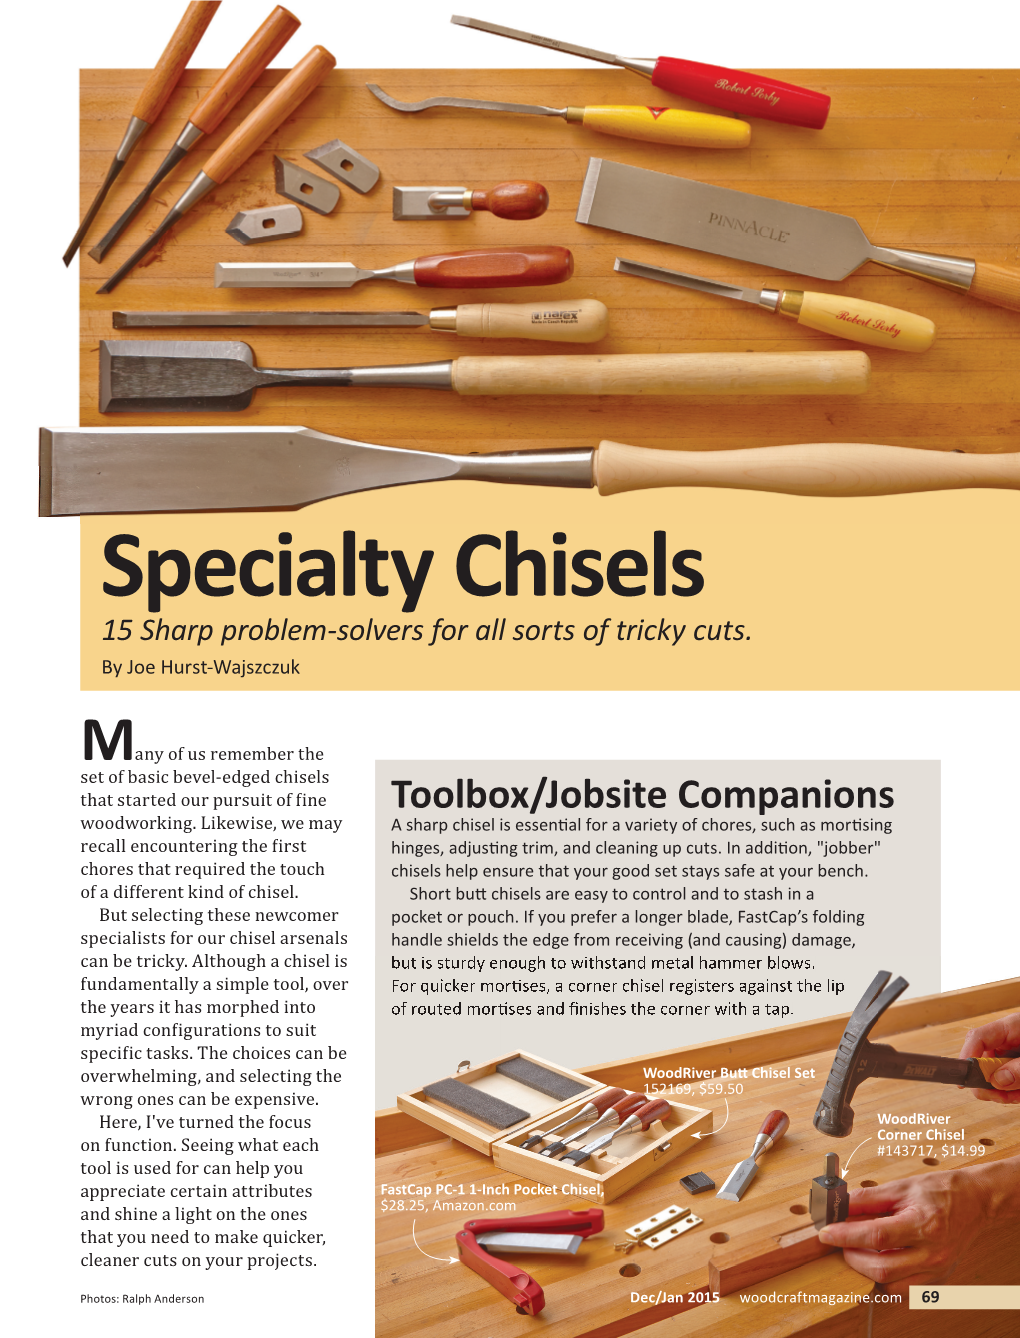 Specialty Chisels 15 Sharp Problem-Solvers for All Sorts of Tricky Cuts